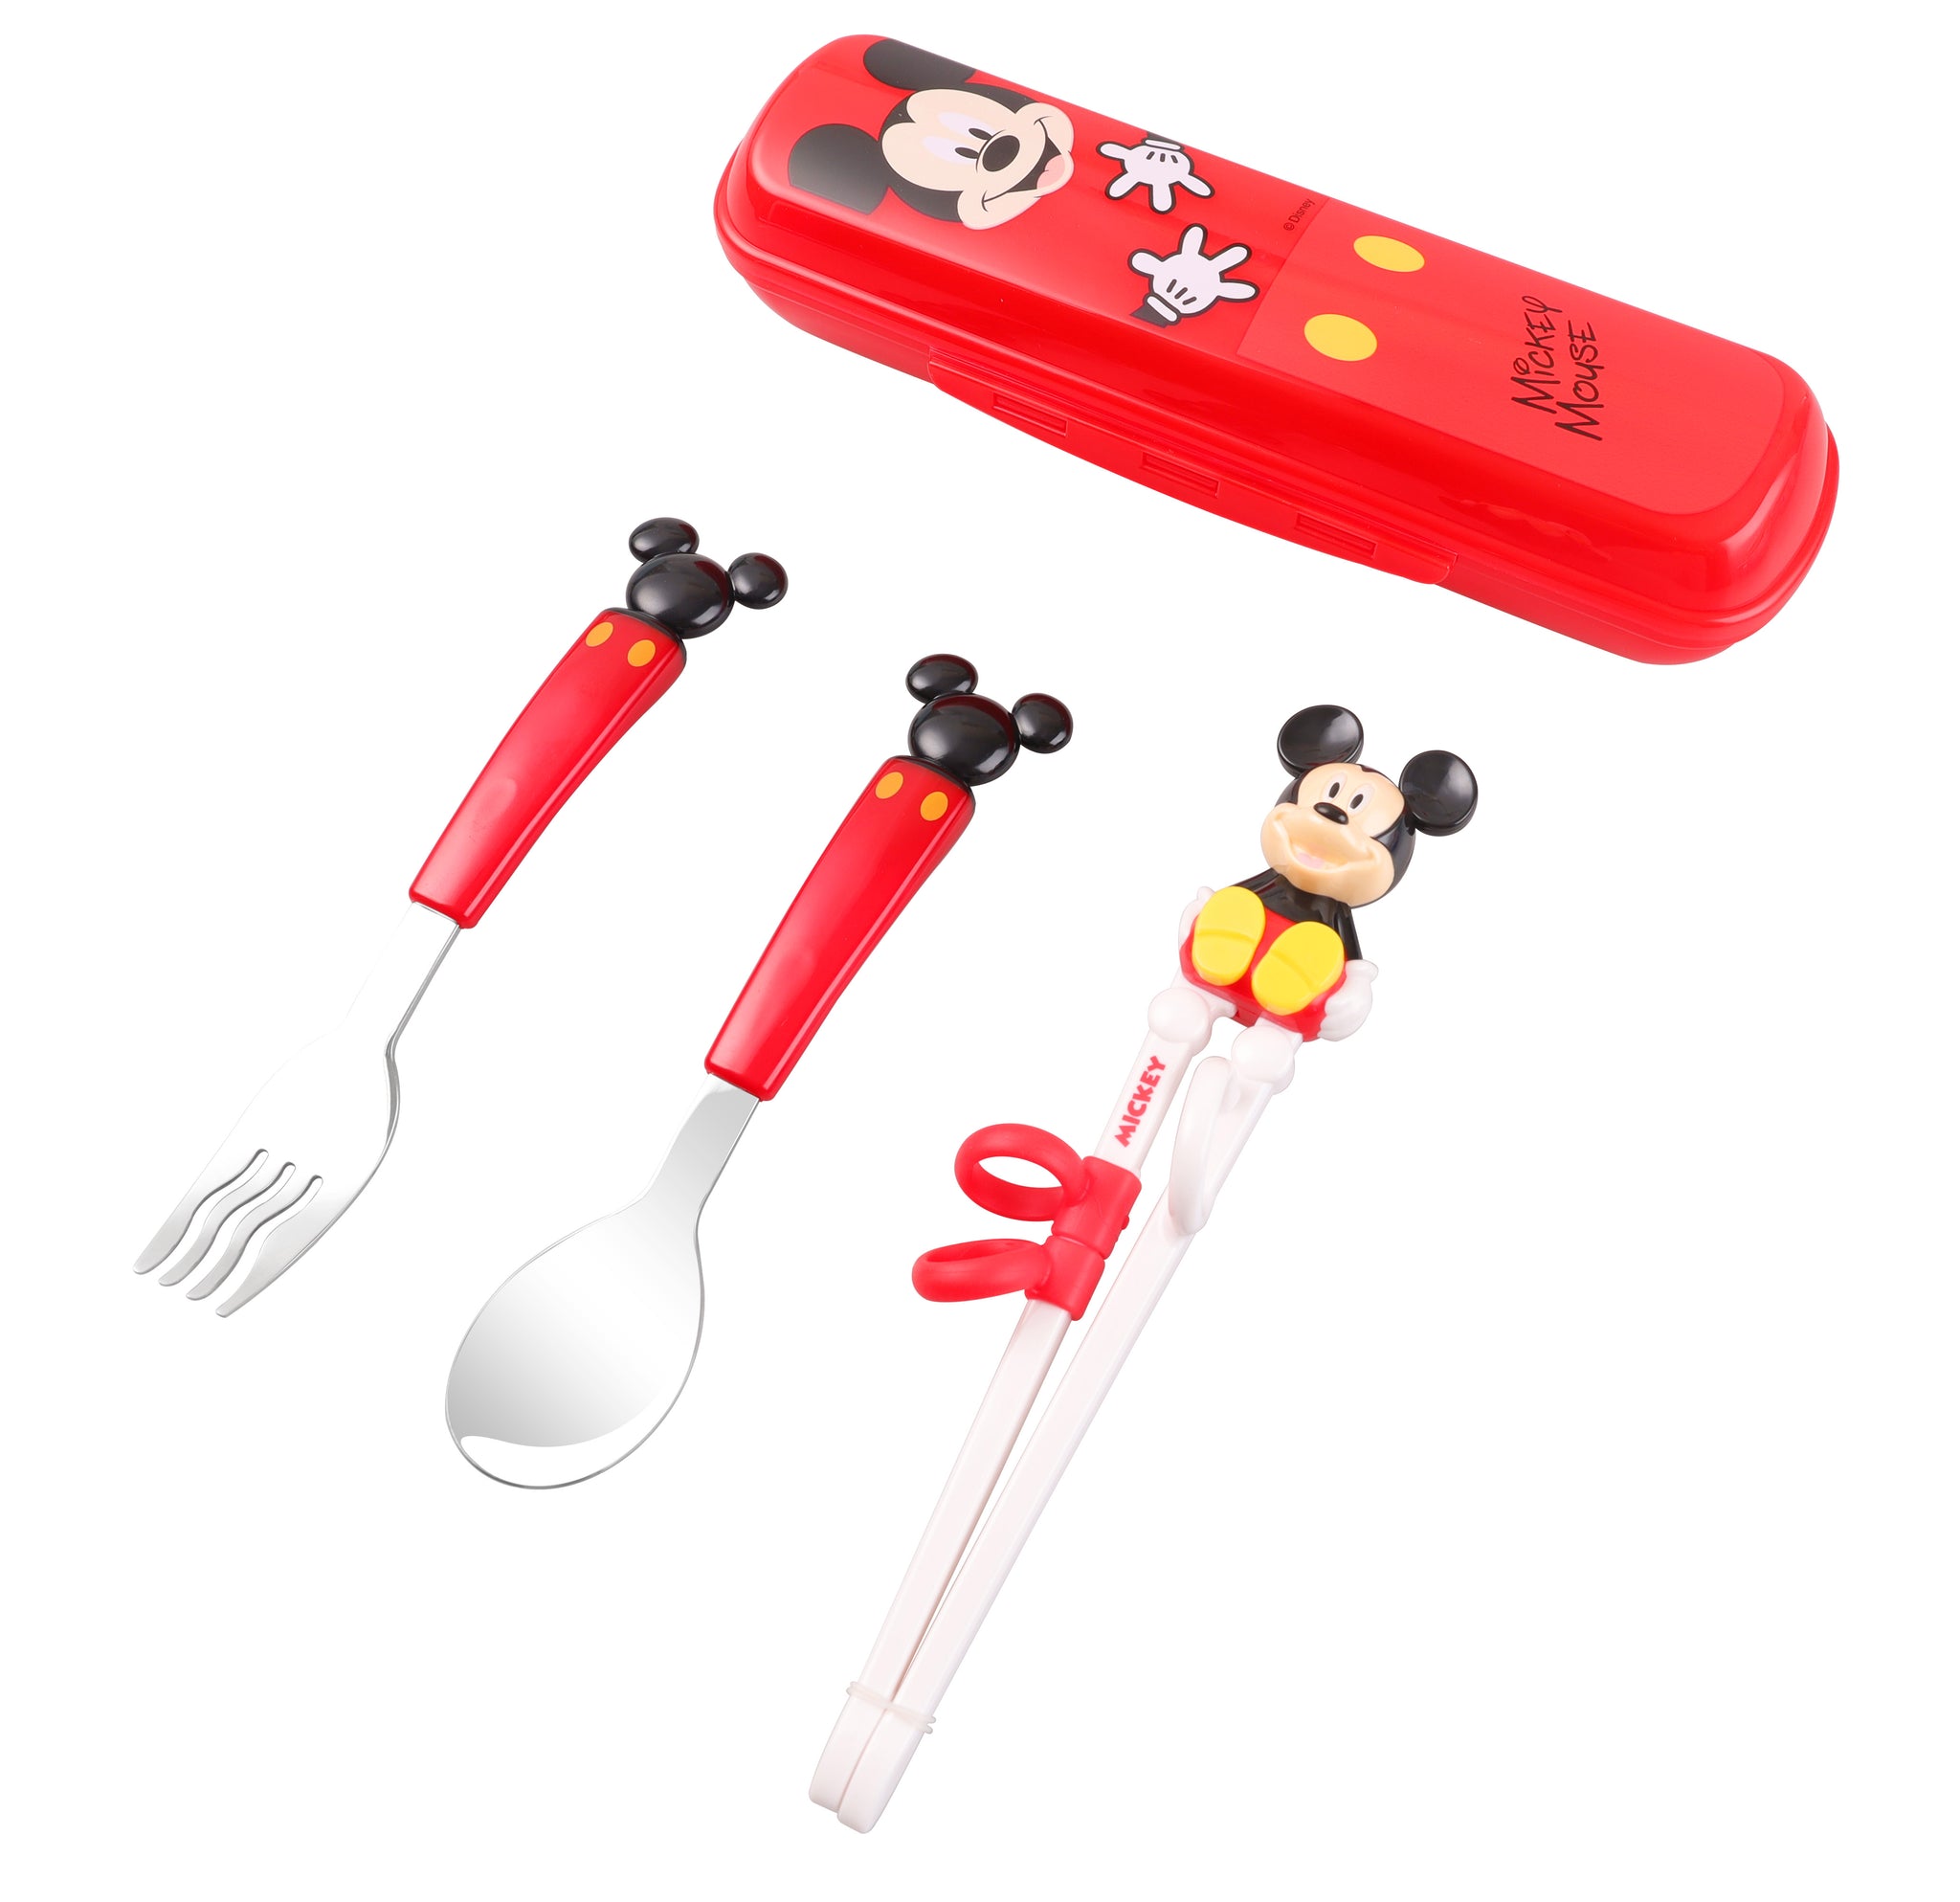 Ocean Theme - Kids Cutlery Fork and Spoon Set - Dishique